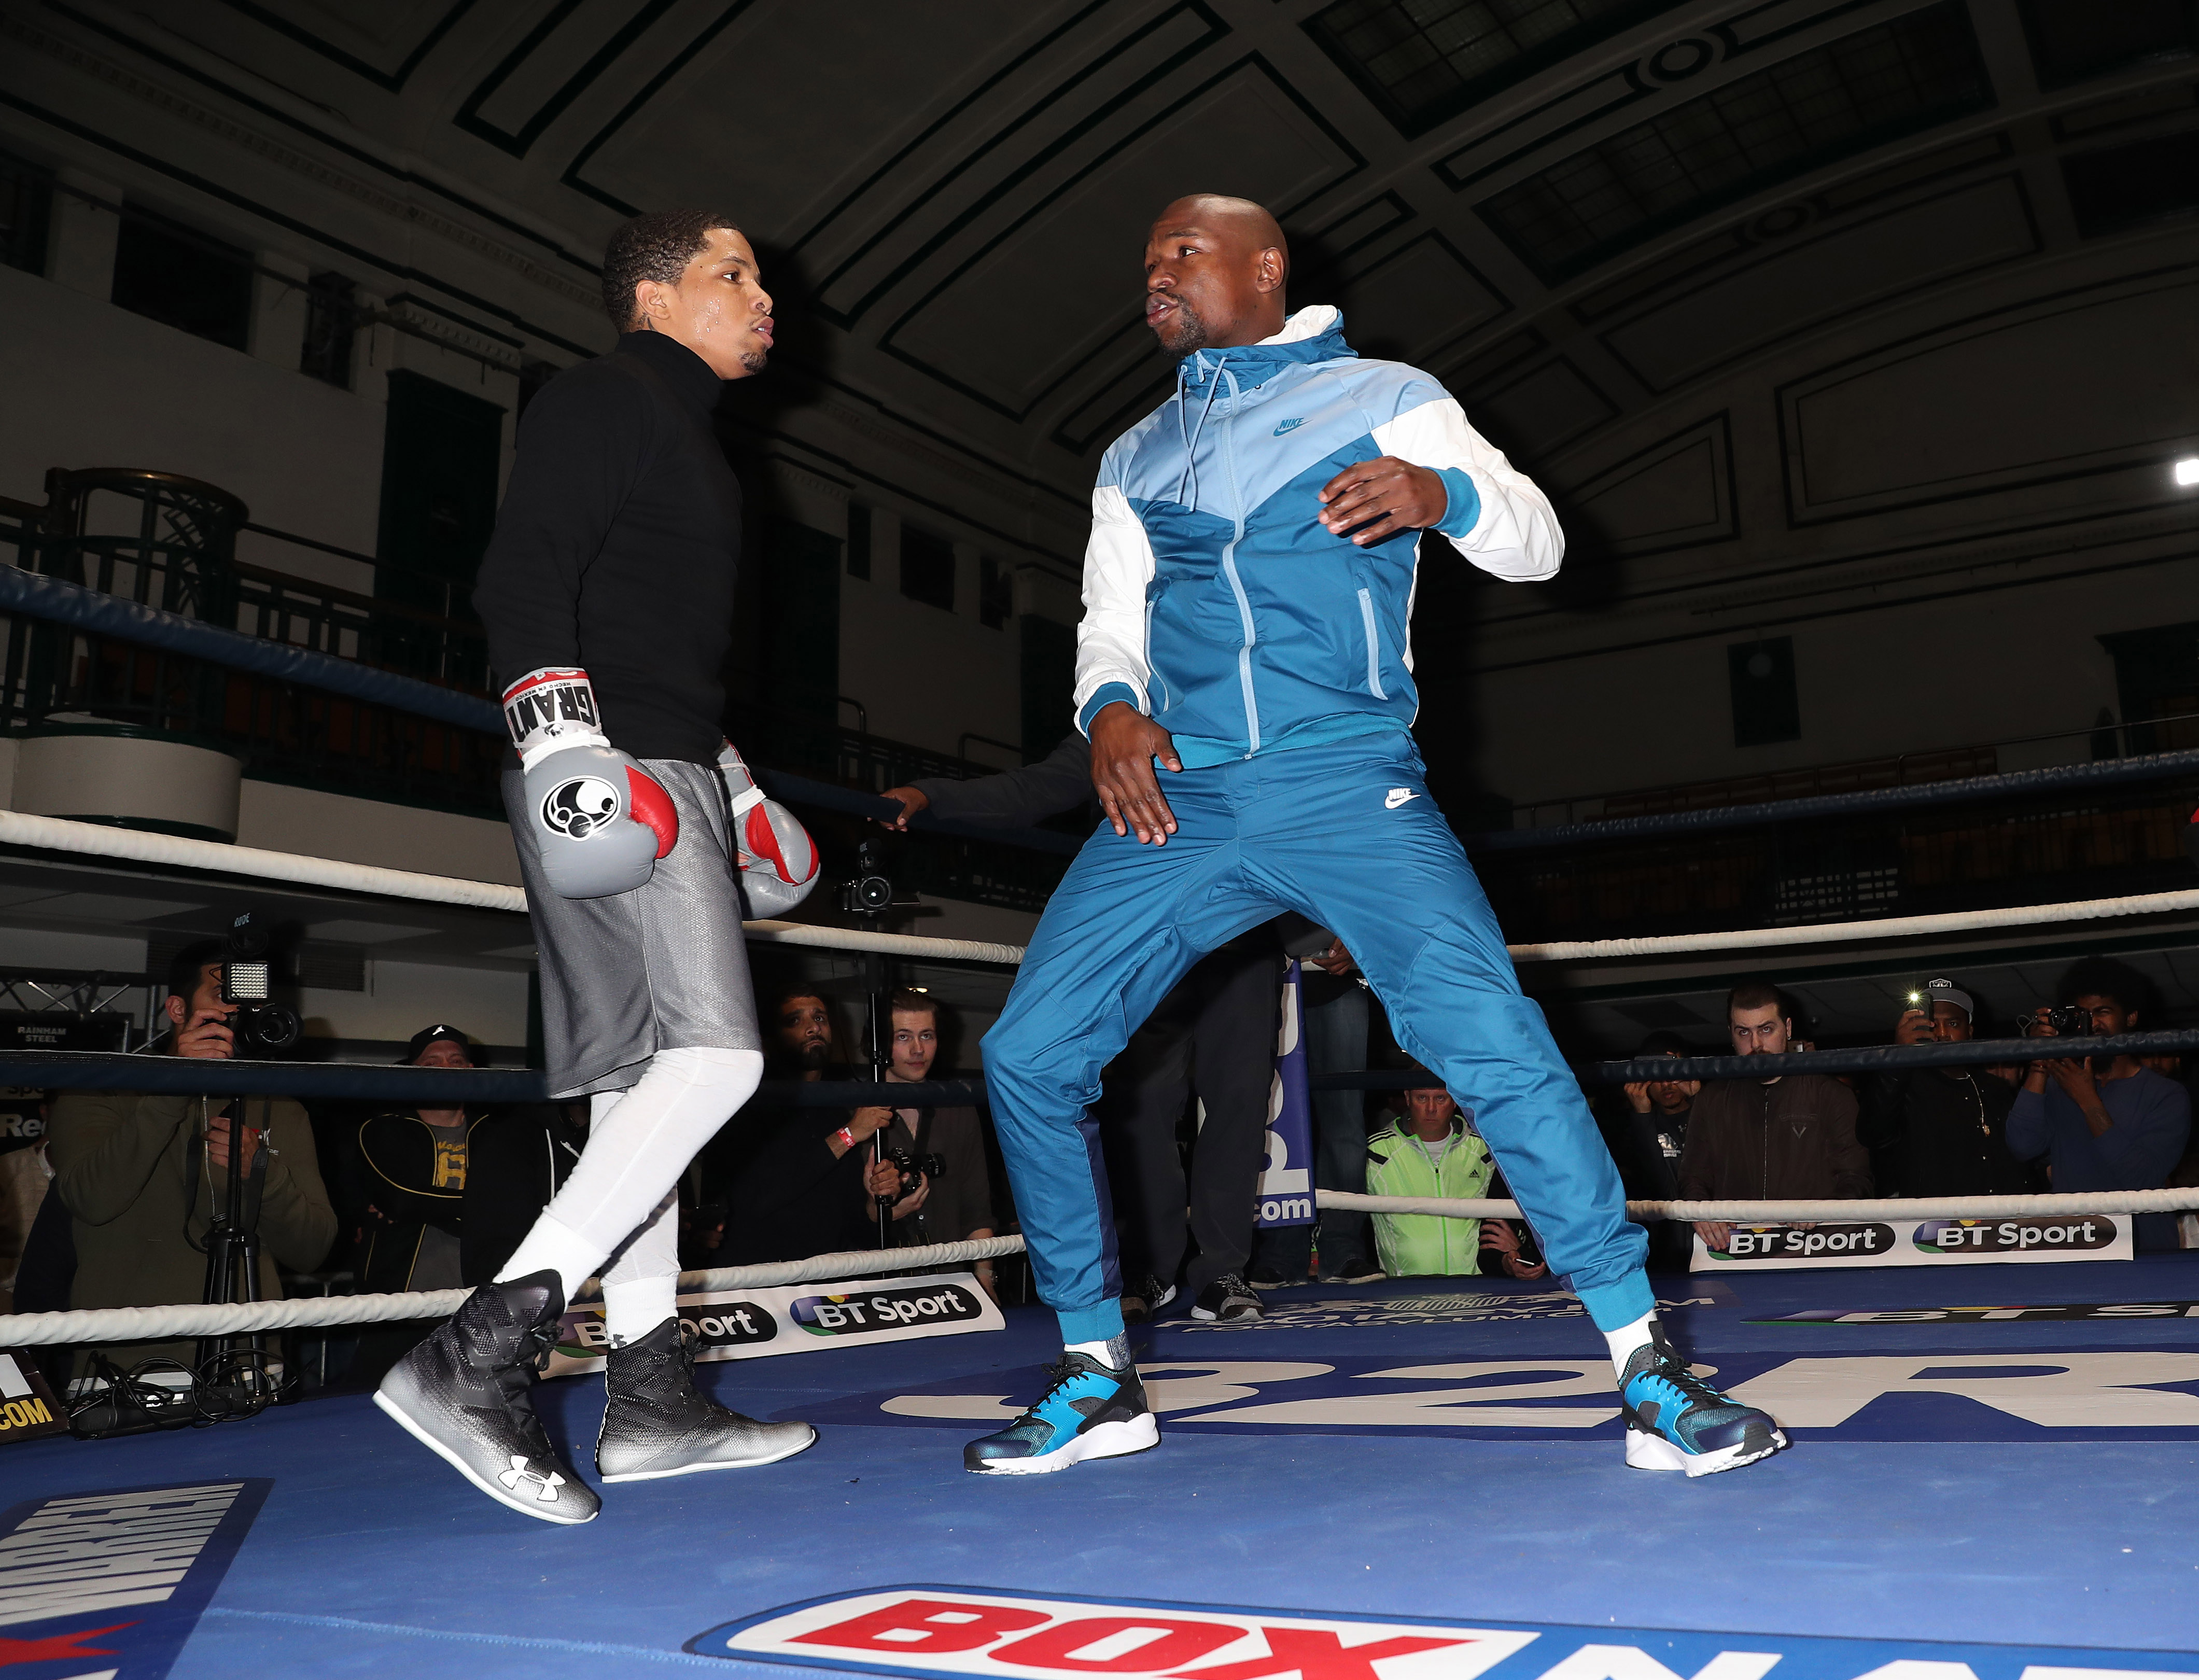 Eric Armit's weekly boxing results - - Boxing News - Ring News244241 x 3240